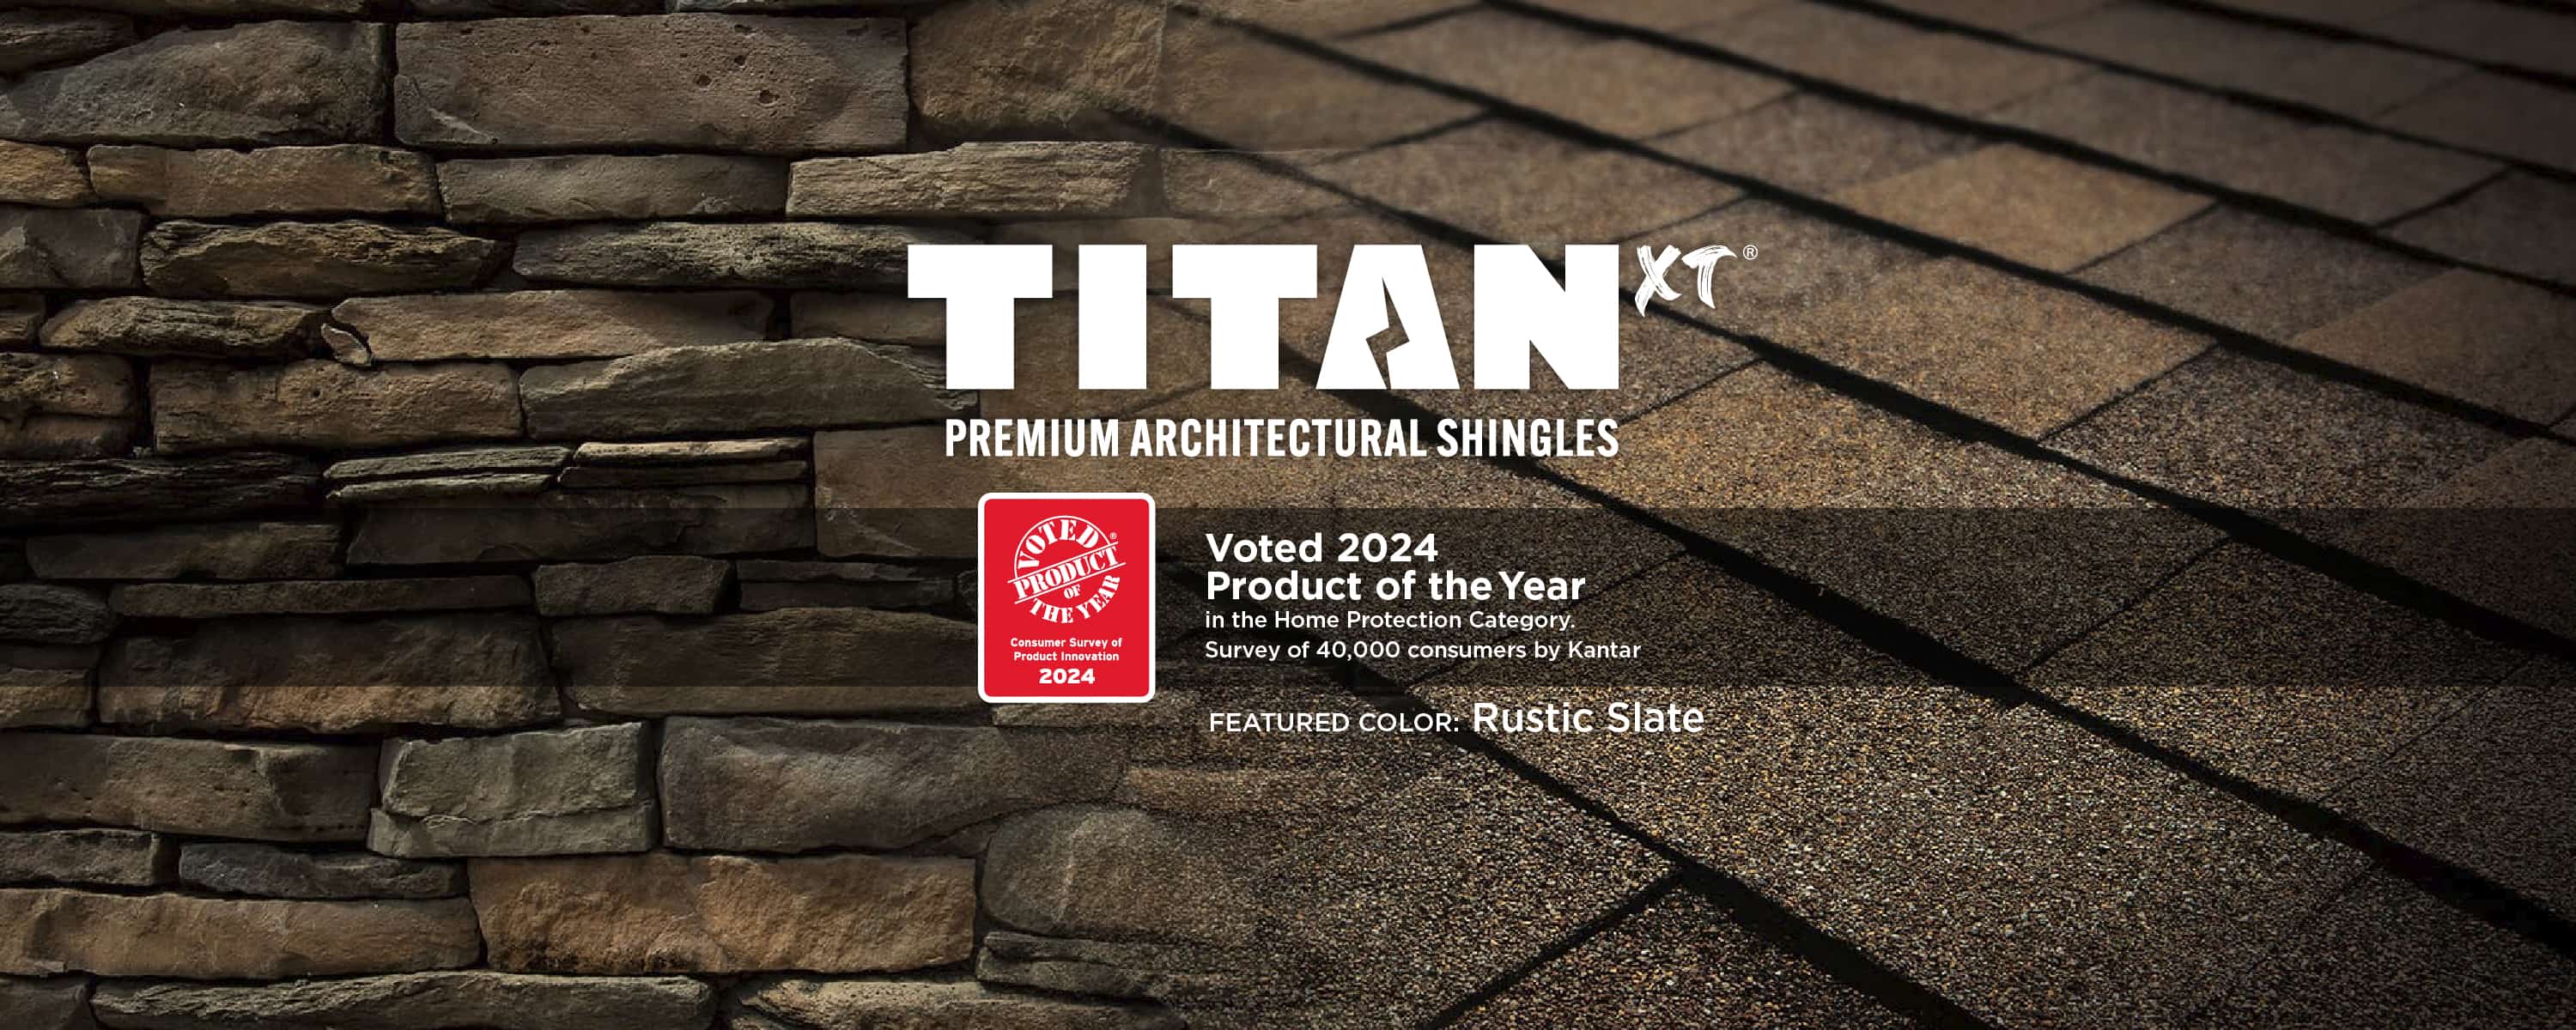 Titan XT 2024 Product of the Year - Rustic Slate